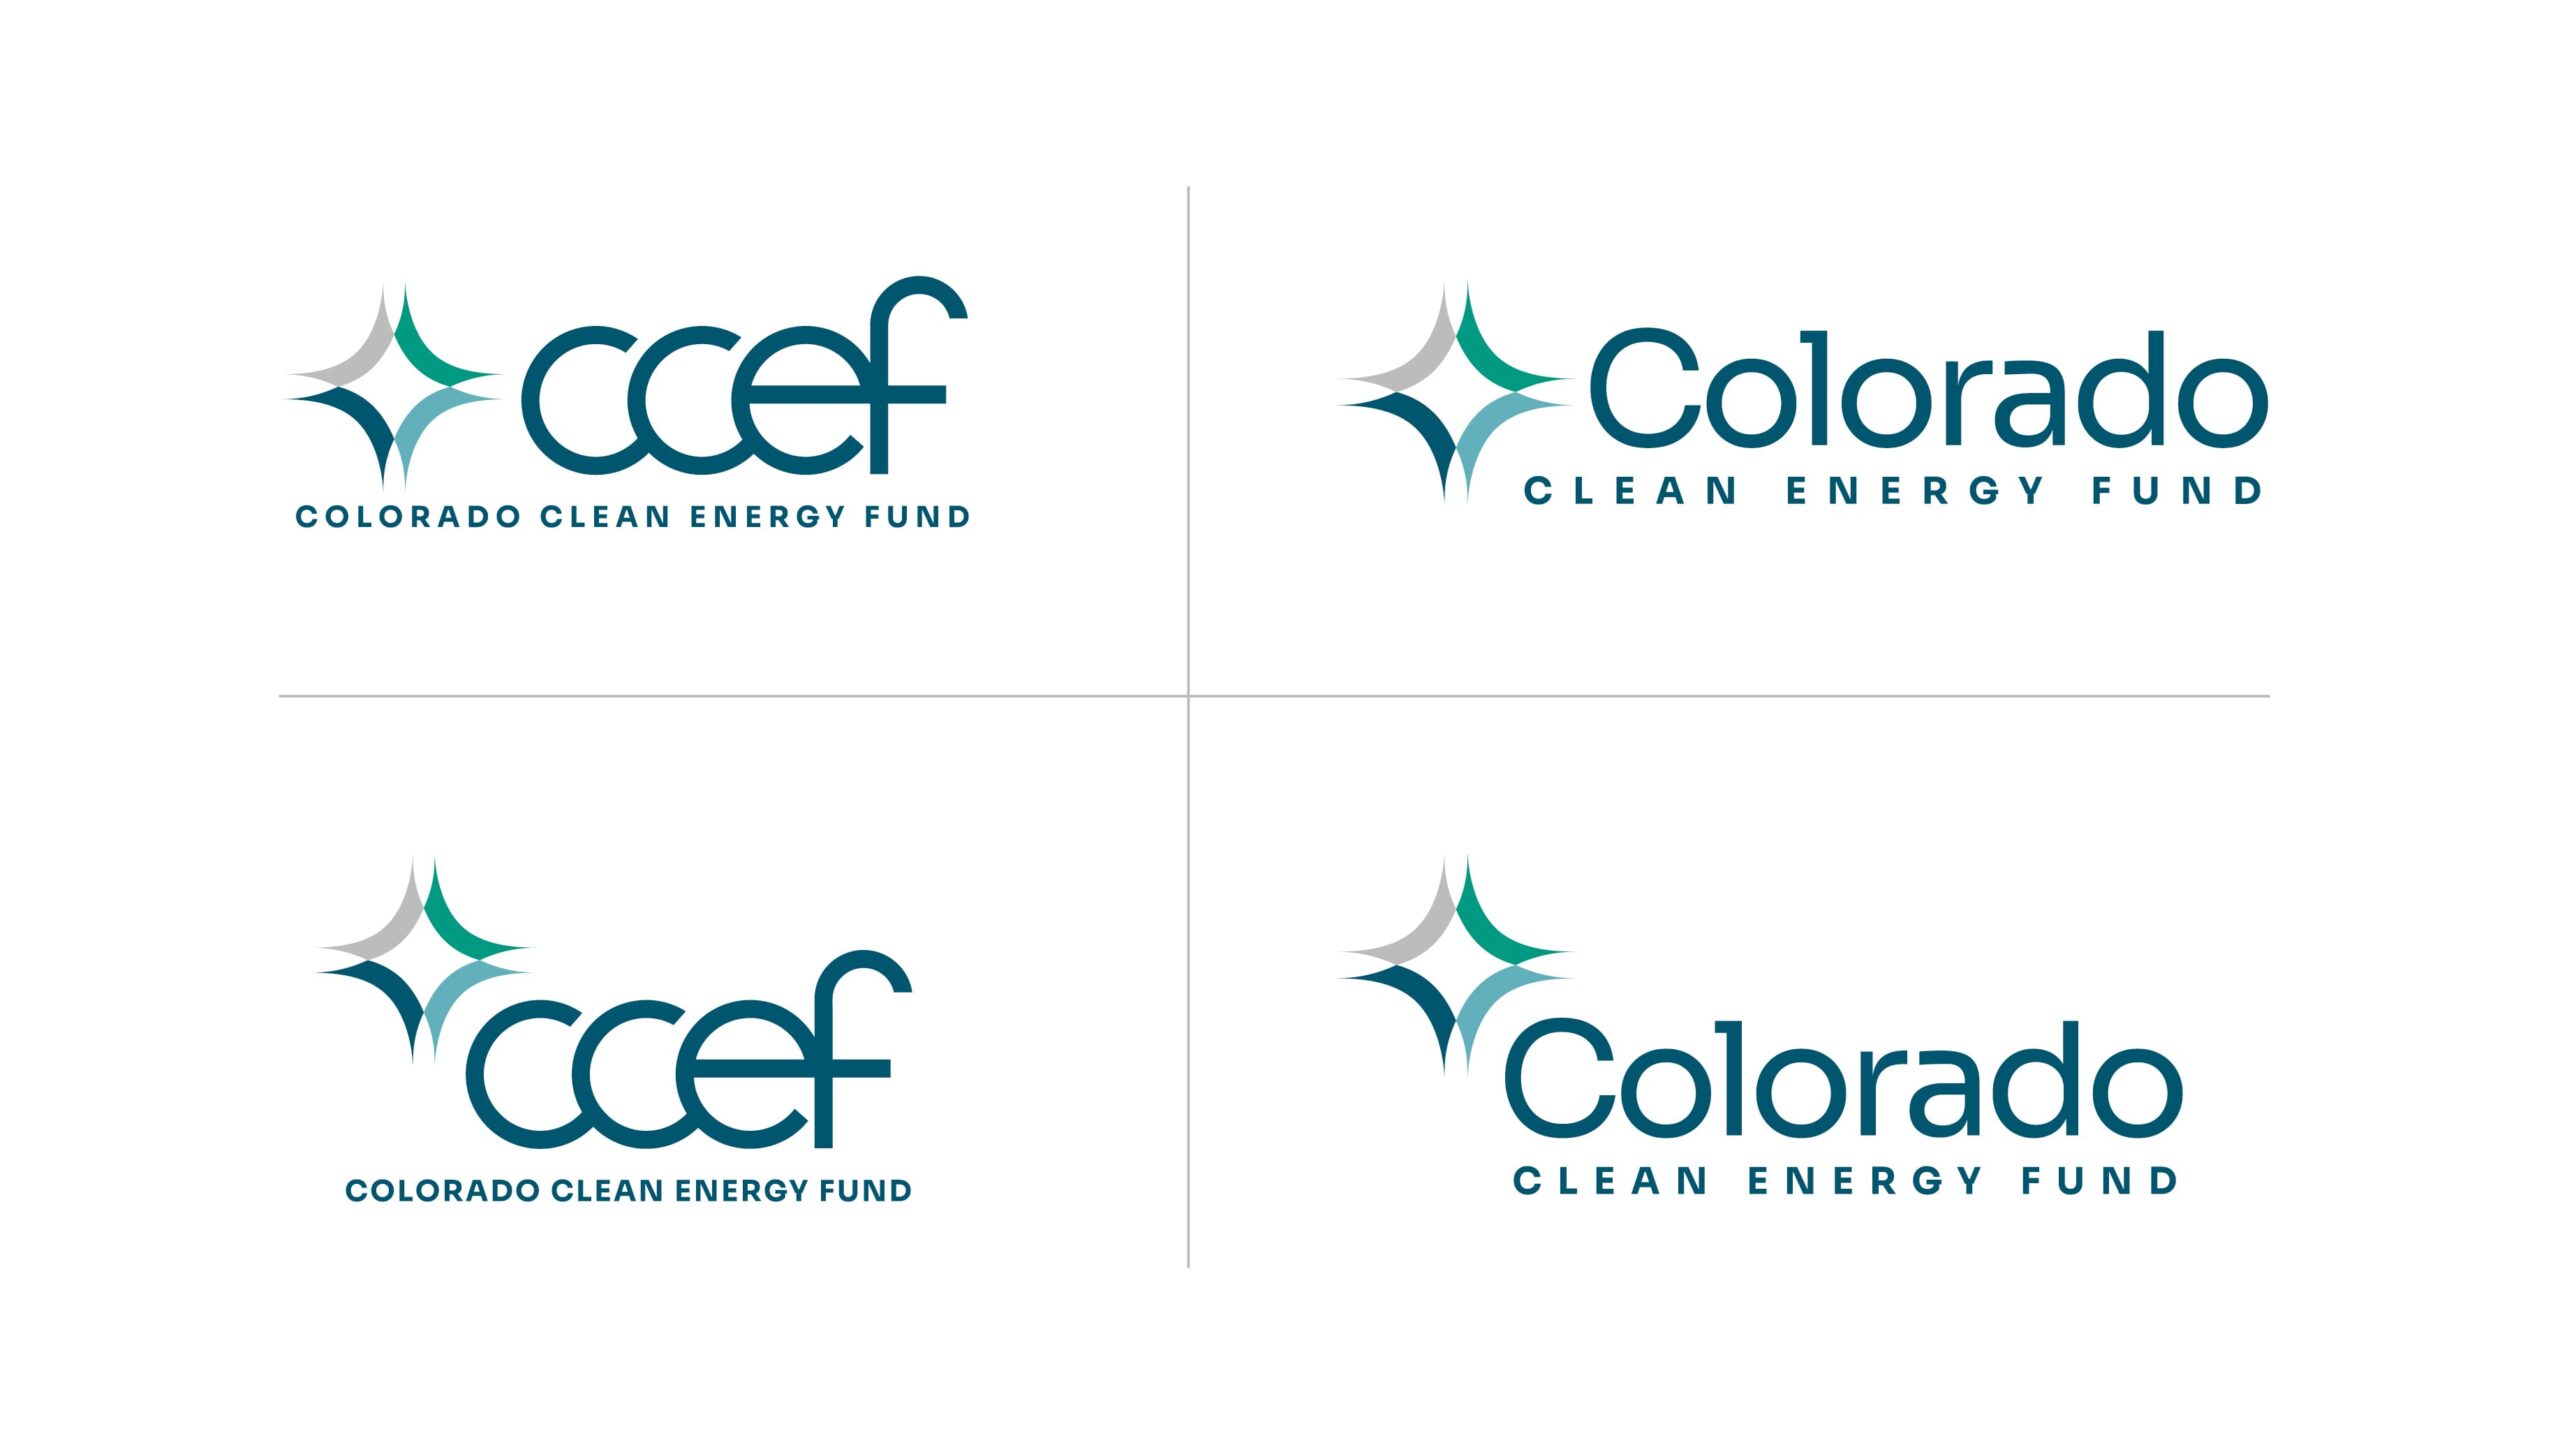 ccef-final-logos-all-together